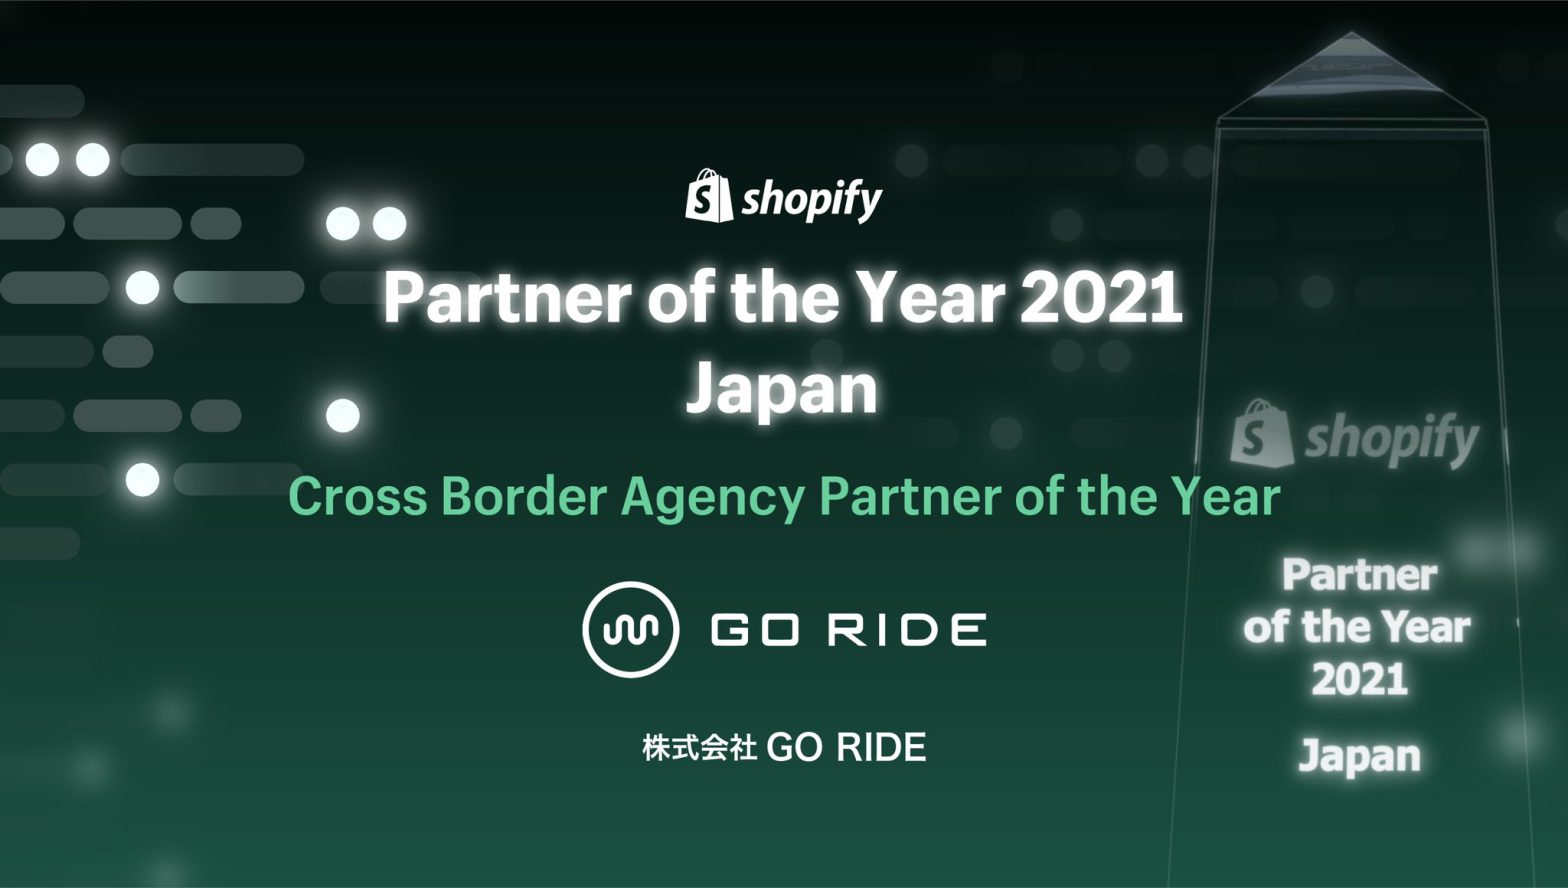 【Shopify Commerce Day】Shopify Cross Border Agency Partner of the Year 2021 を受賞いたしました。